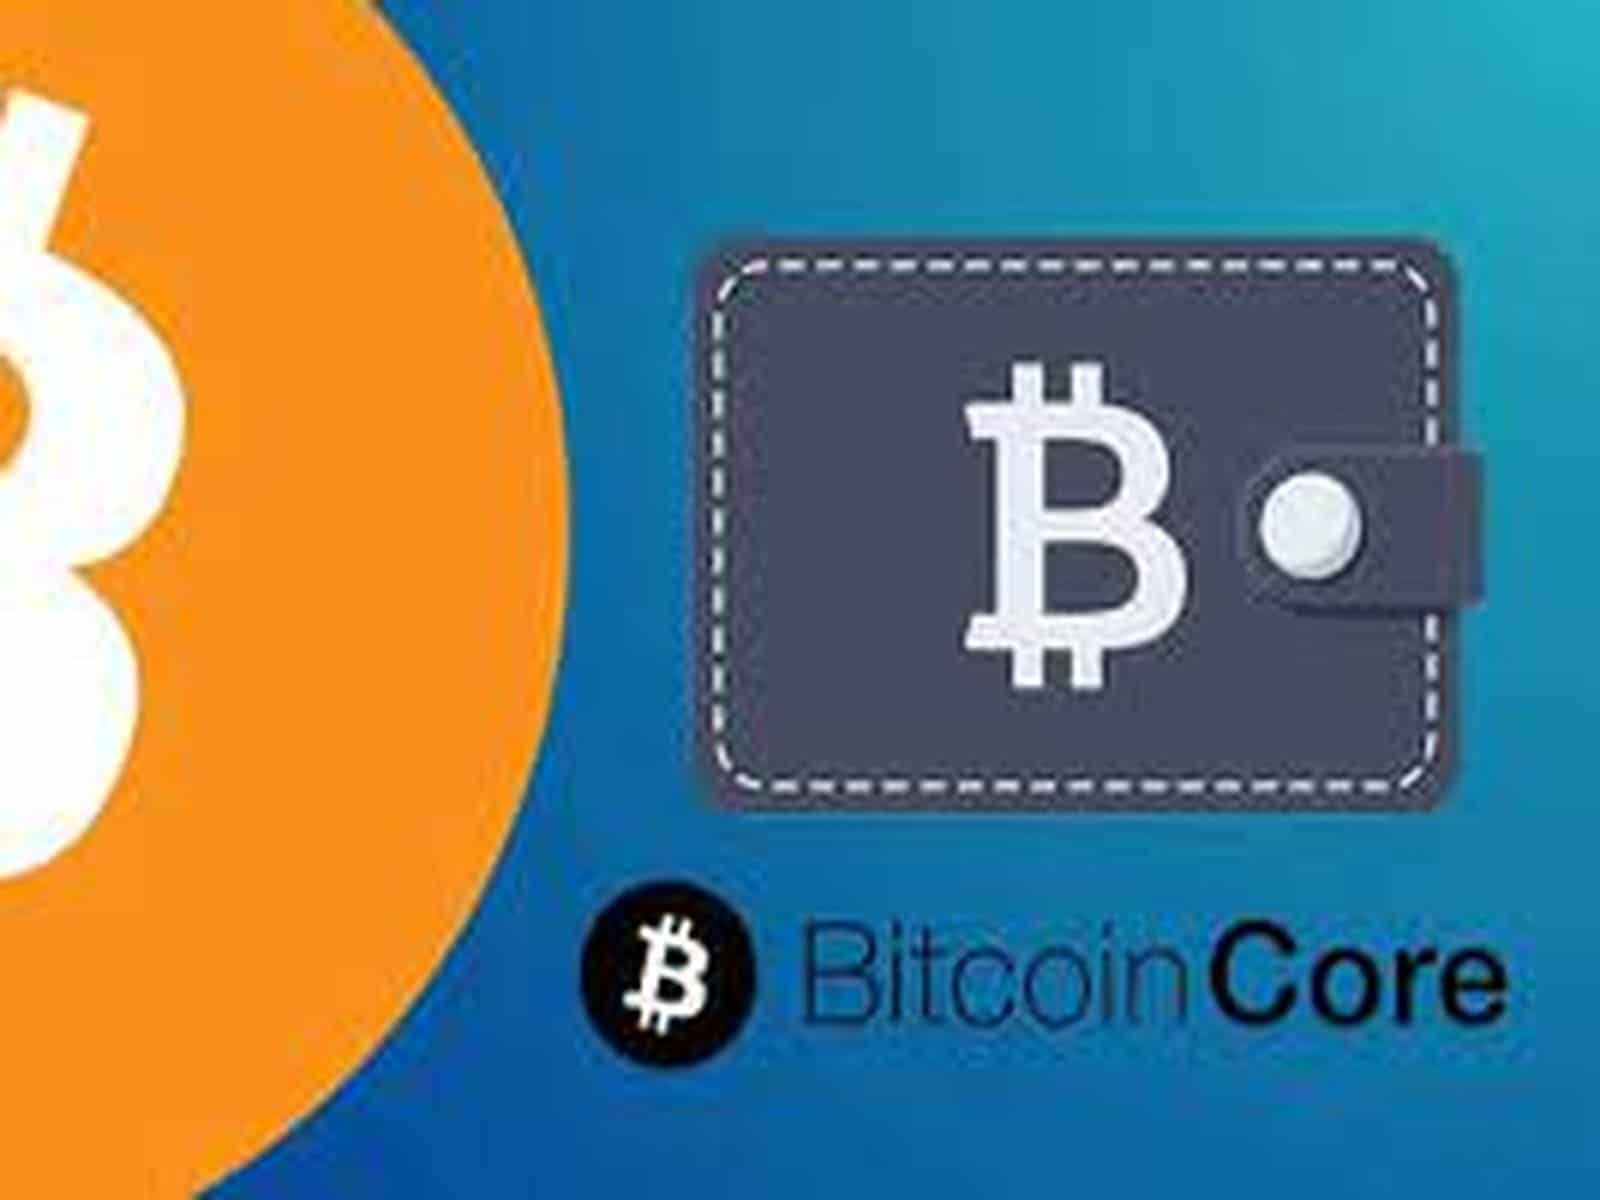 What is Bitcoin Core?